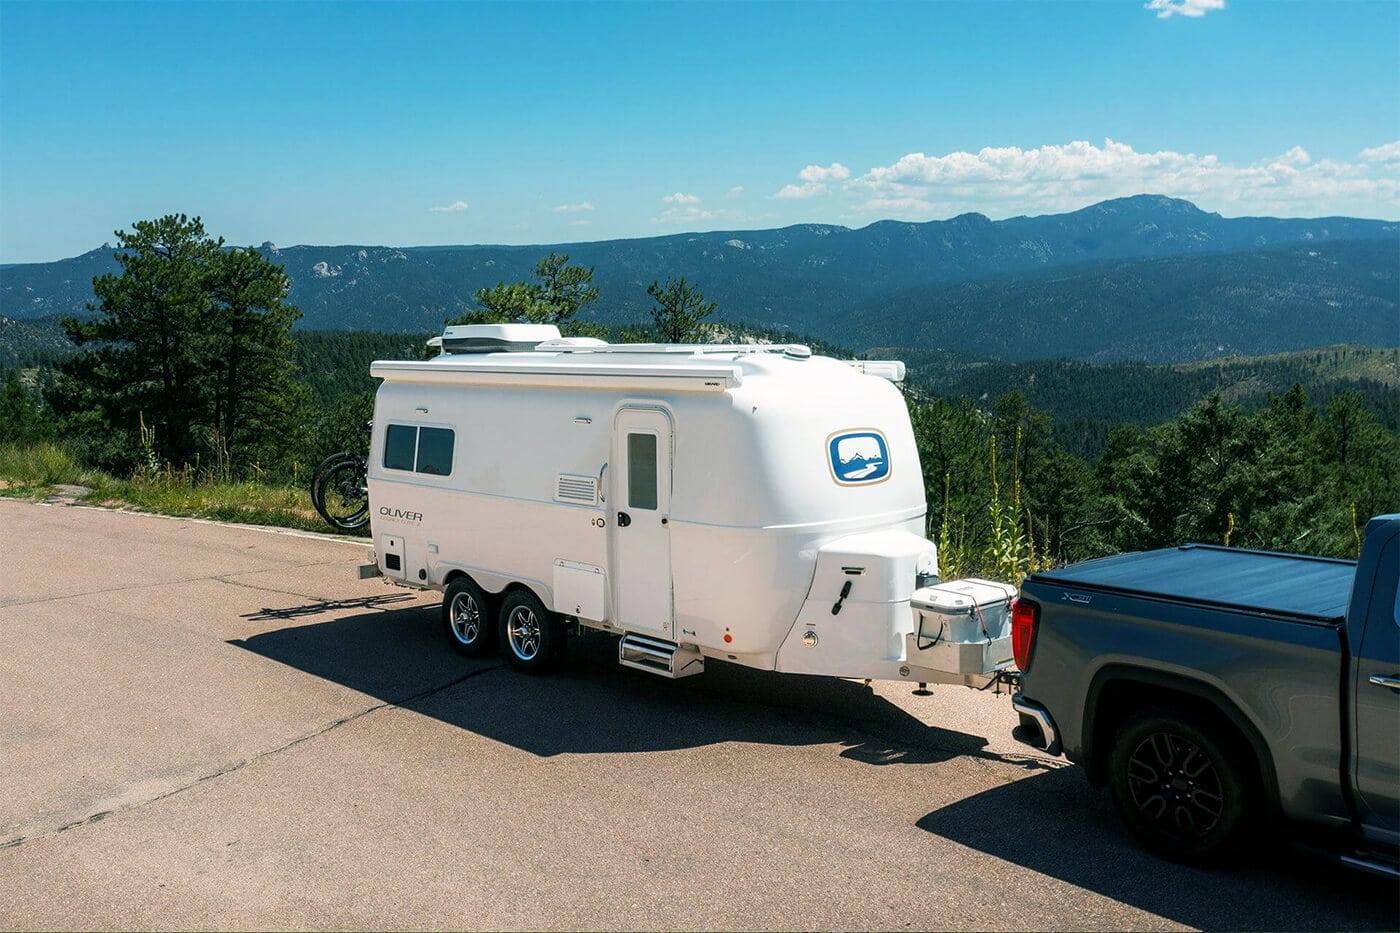 A camper and travel trailer rv parked by a stunning mountain range, with a sense of wanderlust and freedom in the air.